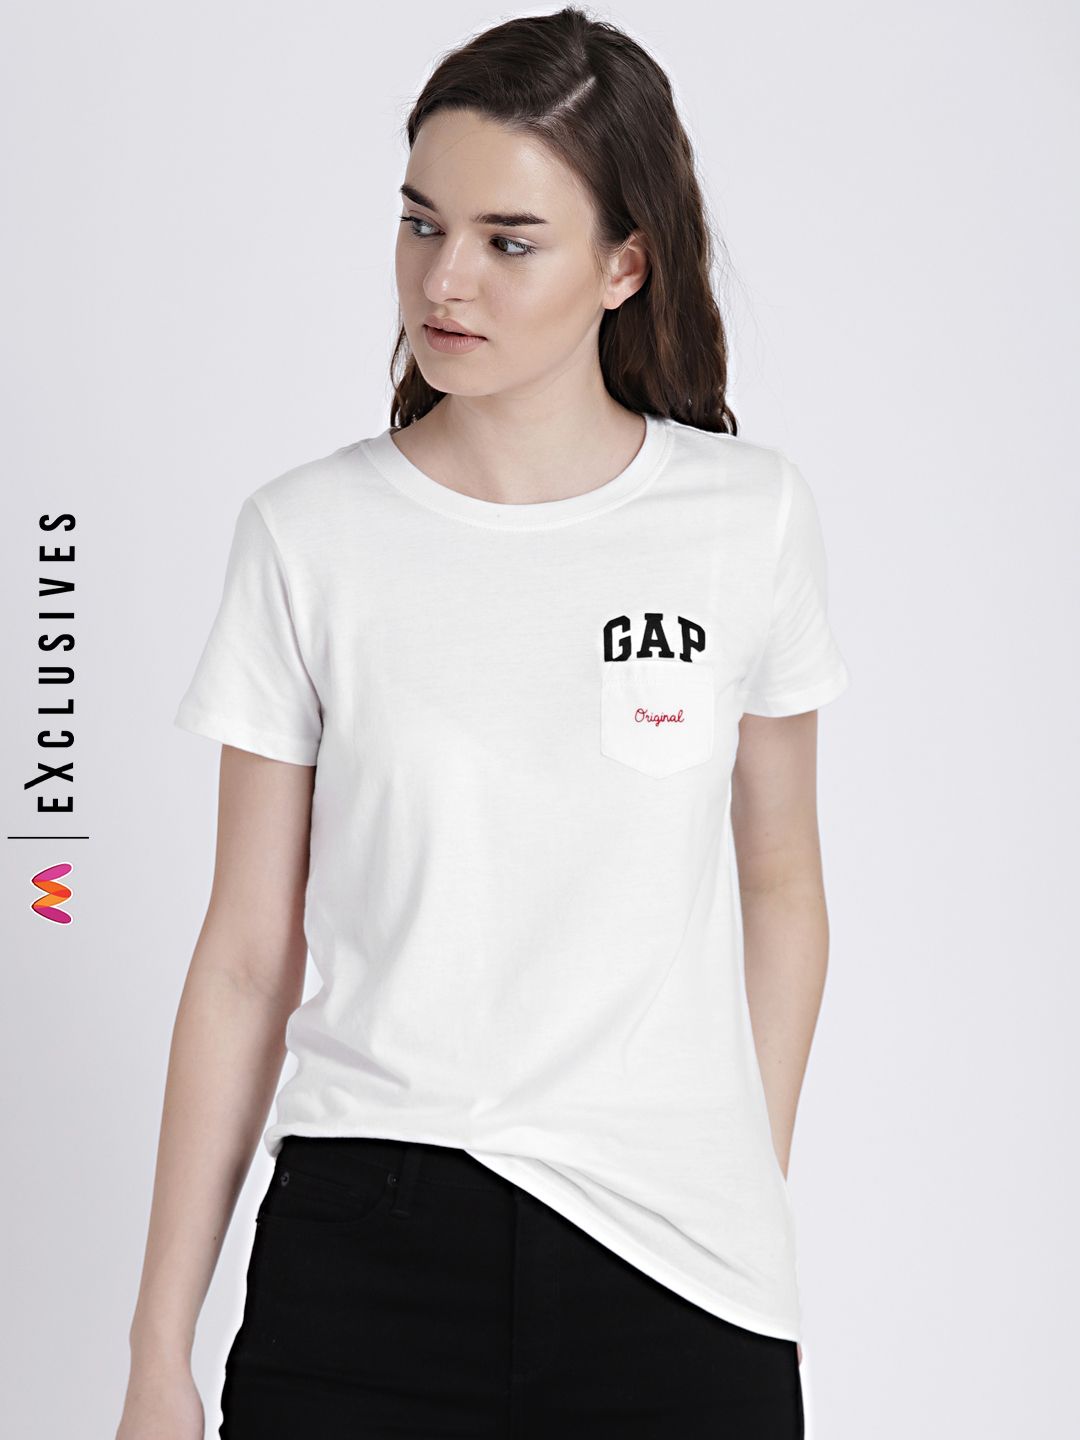 Buy Gap T Shirts Online India - Ficts